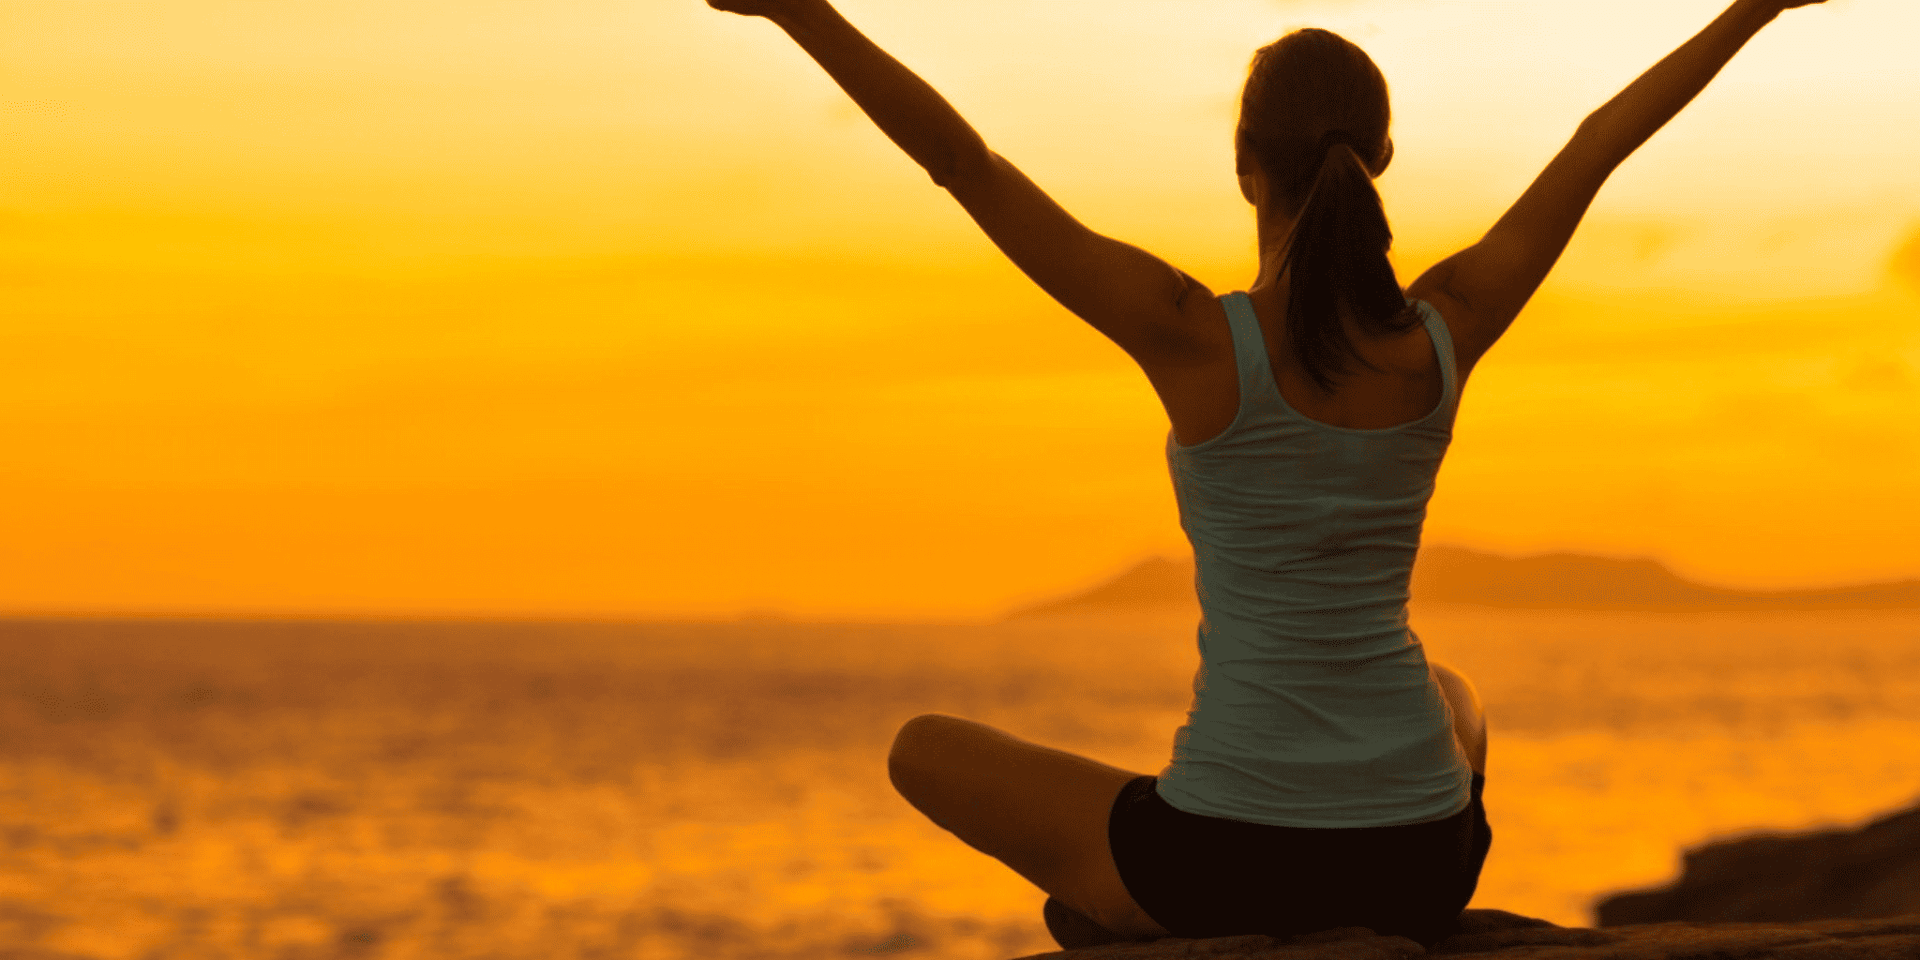 Tips to keep the body and mind healthy - The Statesman